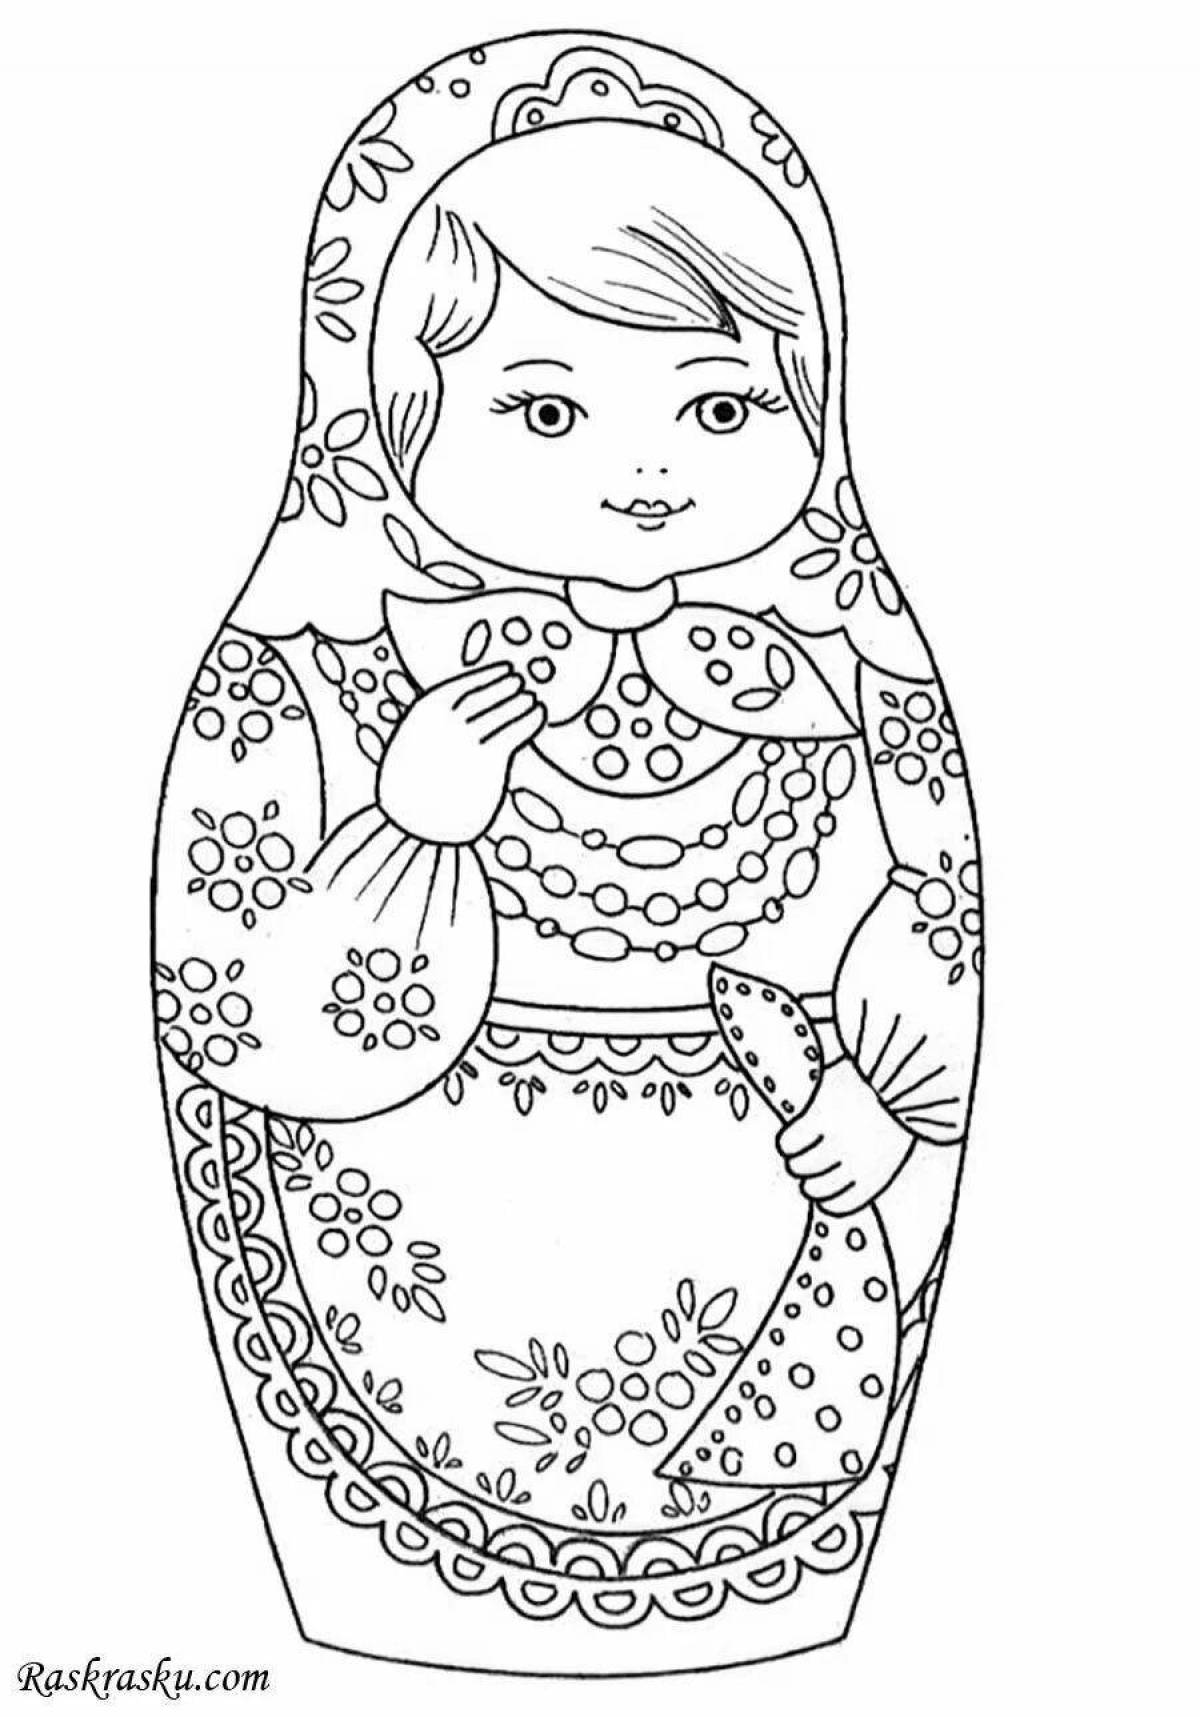 A fascinating Russian matryoshka coloring book for children 6-7 years old